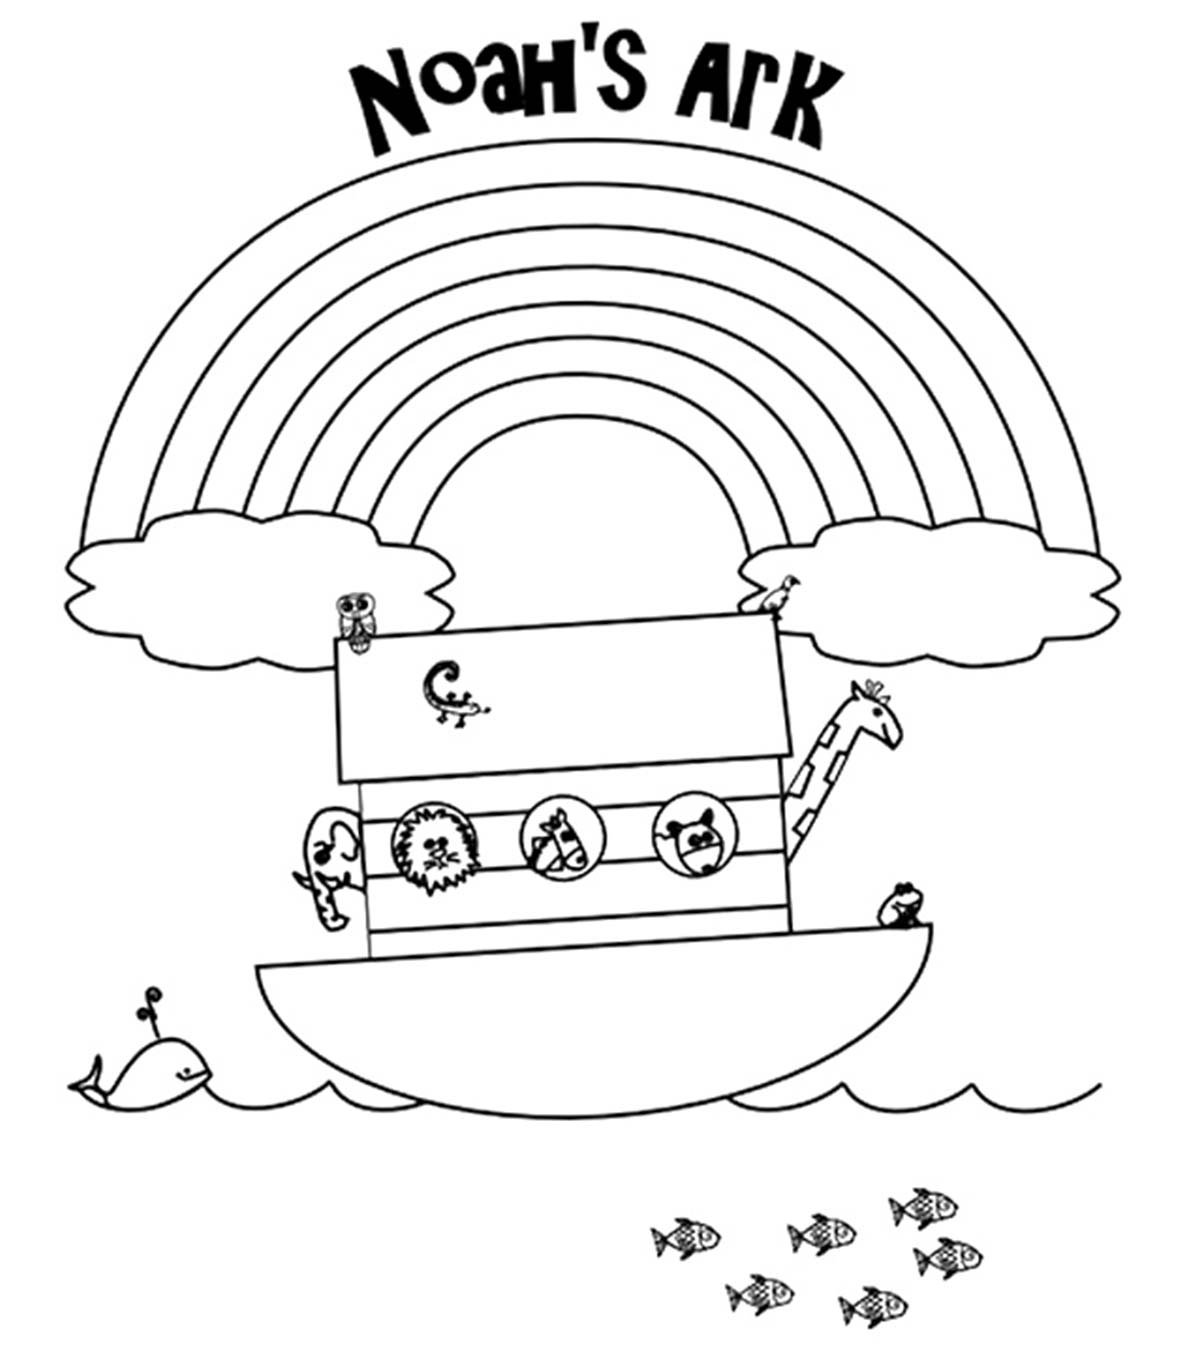 noahs-ark-story-coloring-pages-coloring-pages